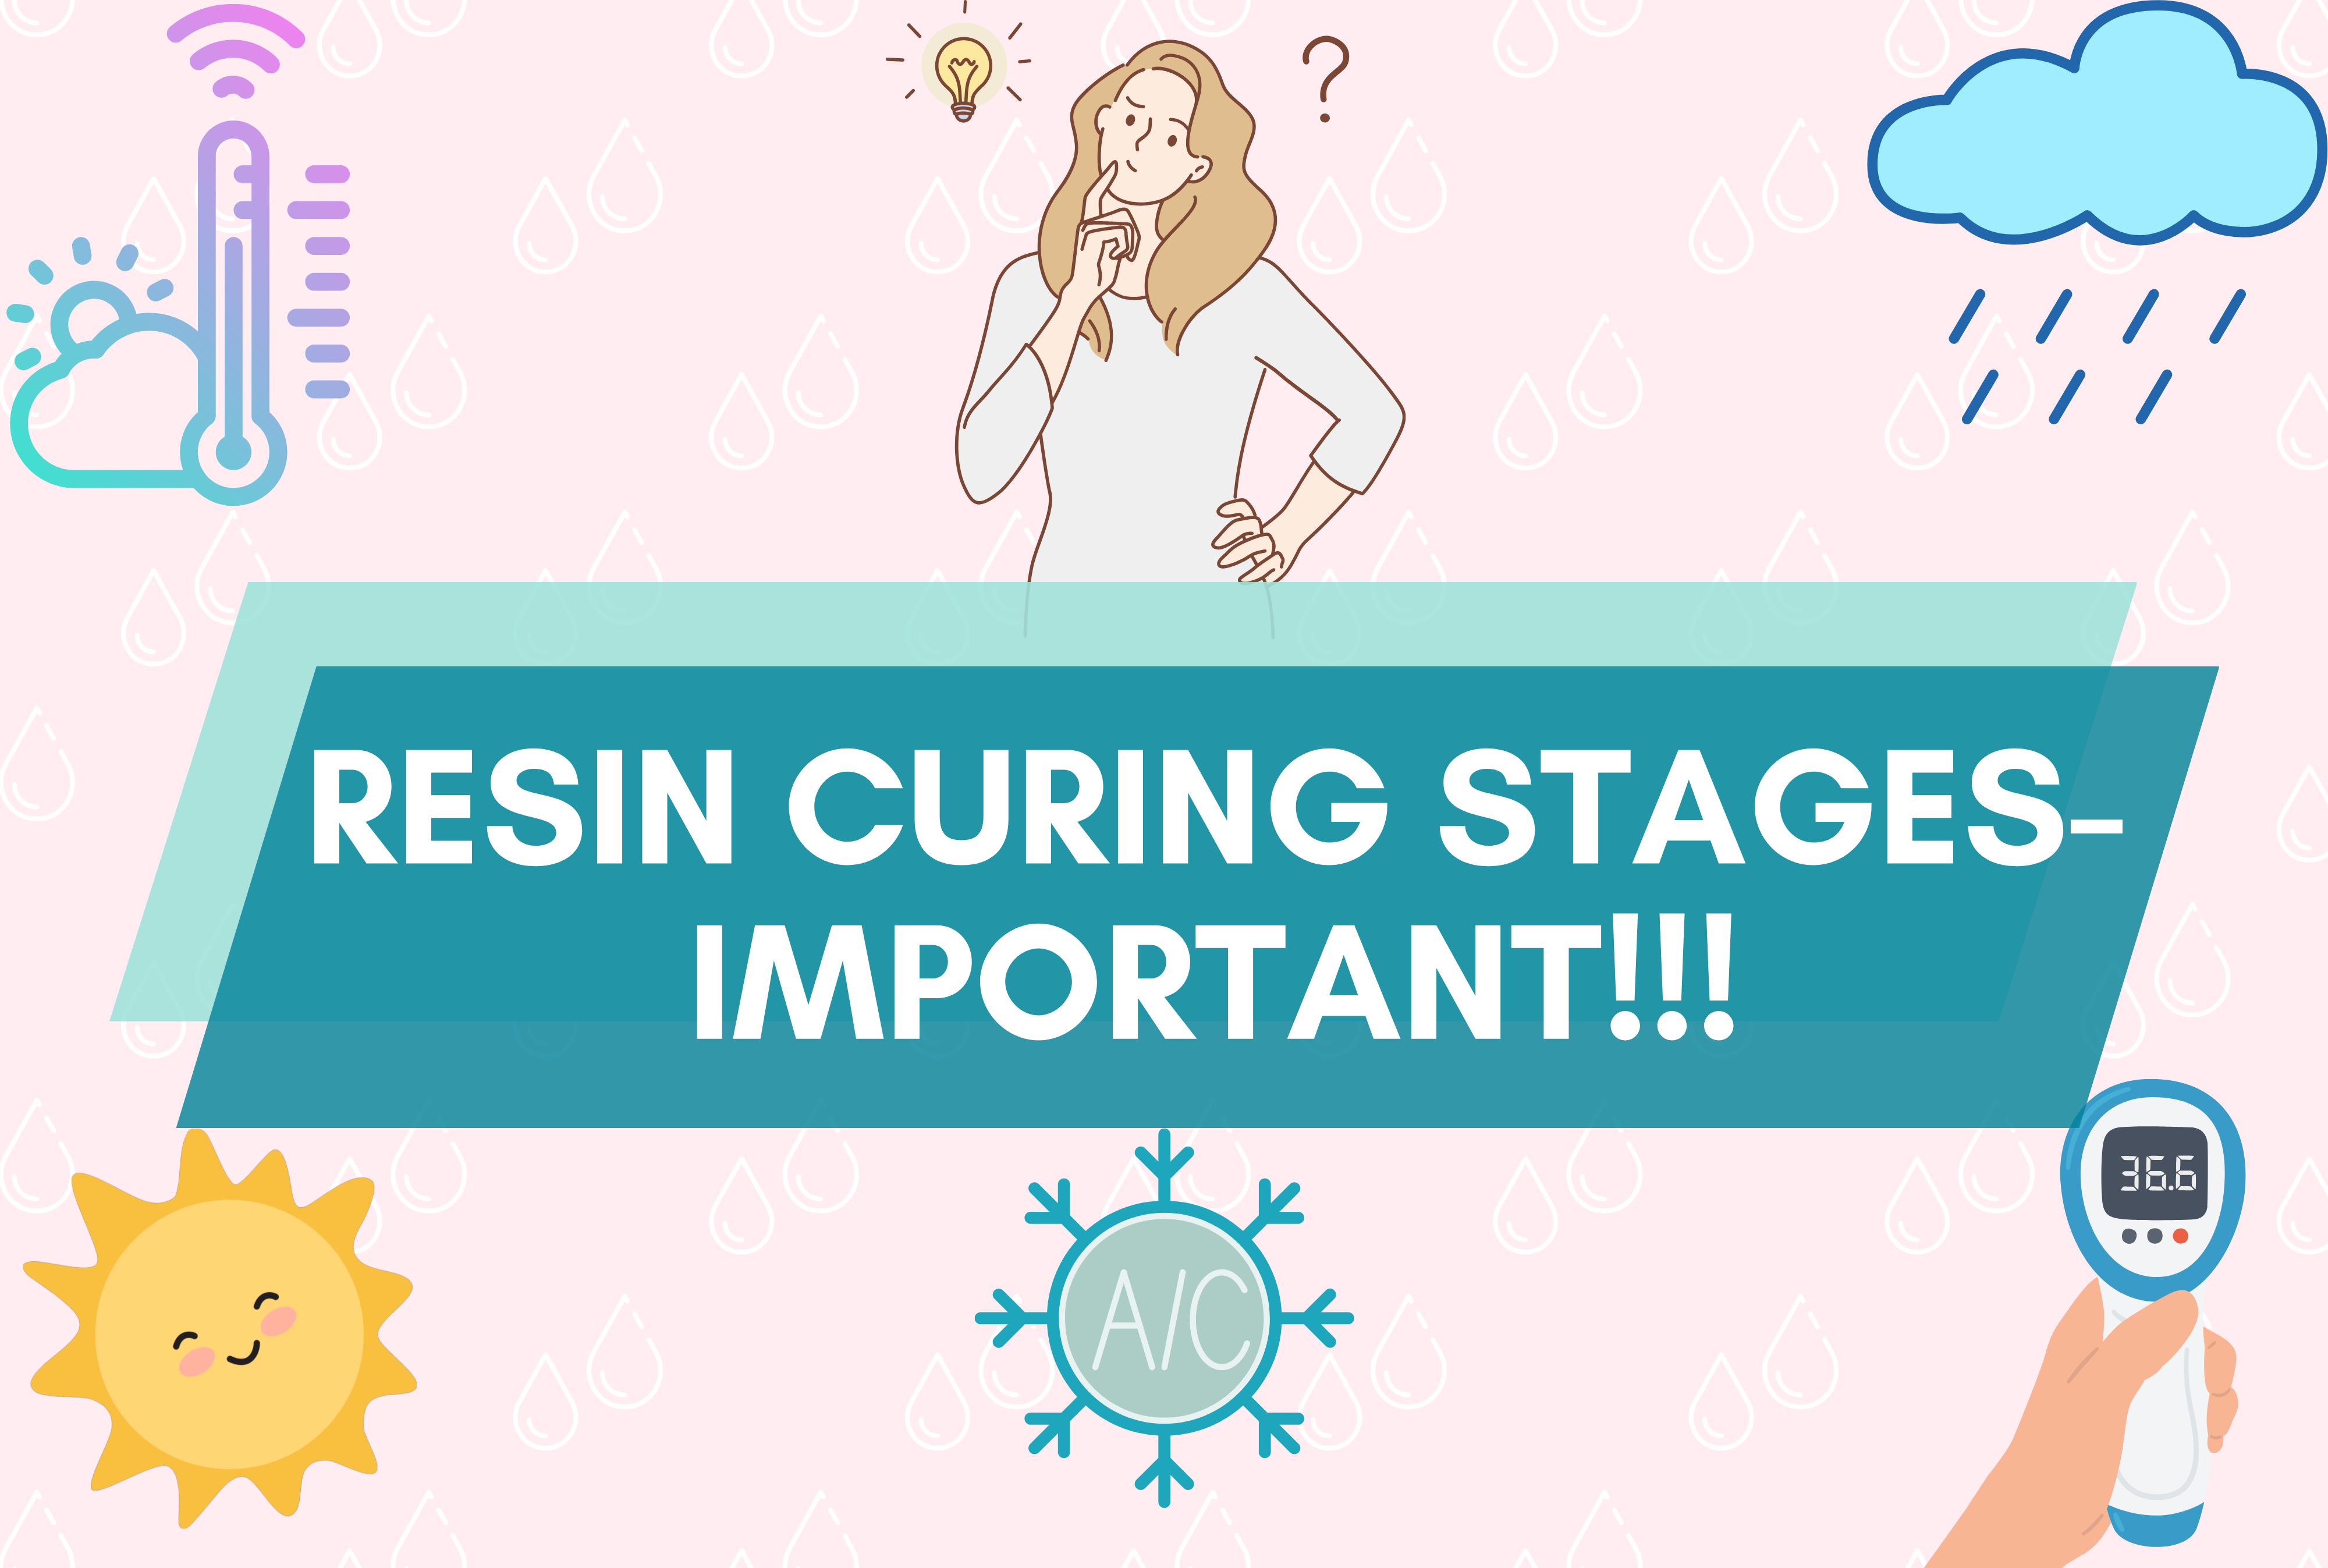 Resin Curing Stages- Important!!!